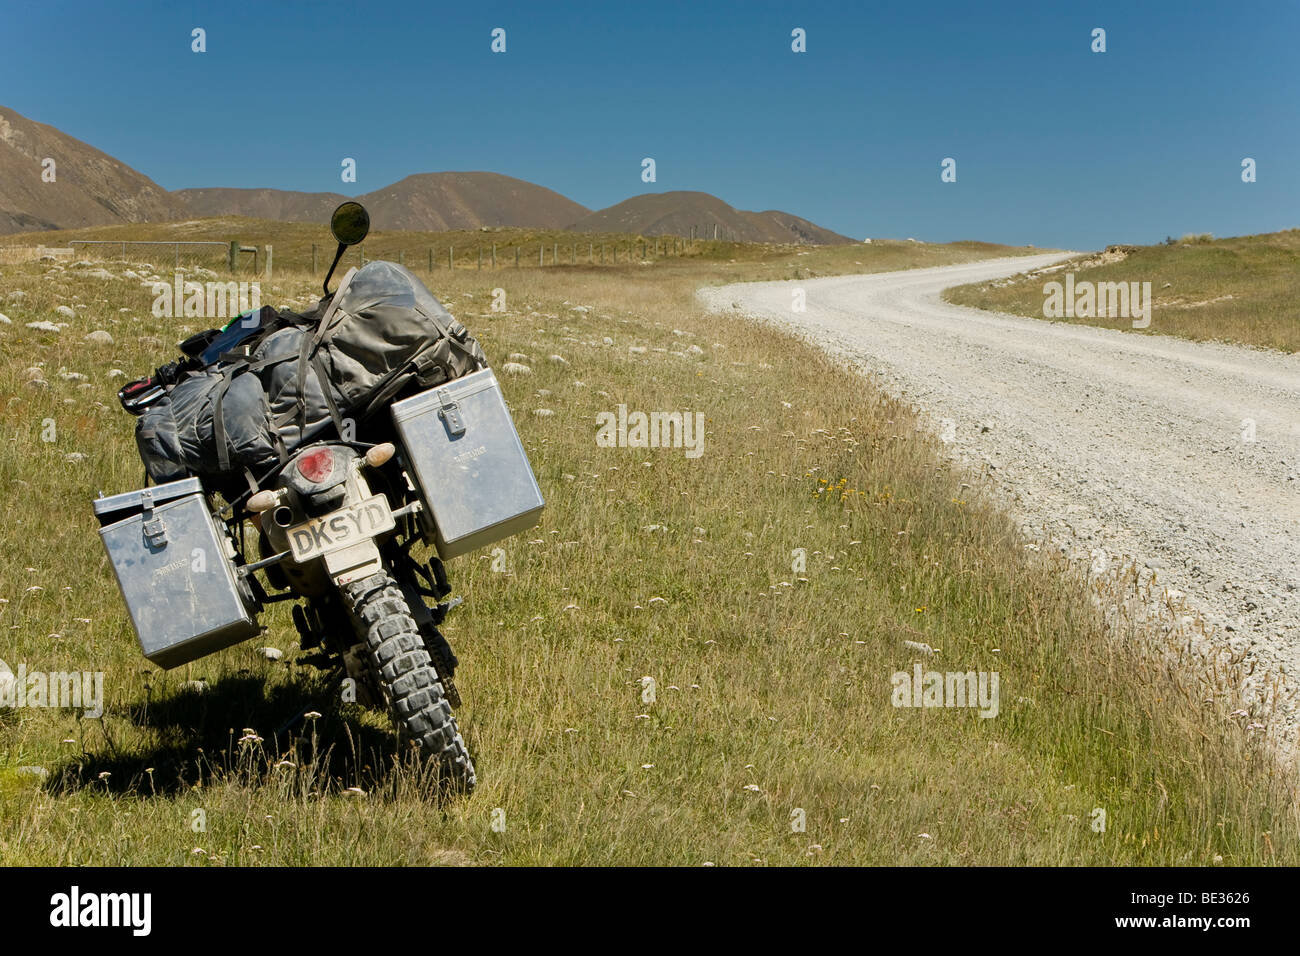 Enduro motorcycle standing next to a dusty dirt road, Hakatere, South Island, New Zealand Stock Photo